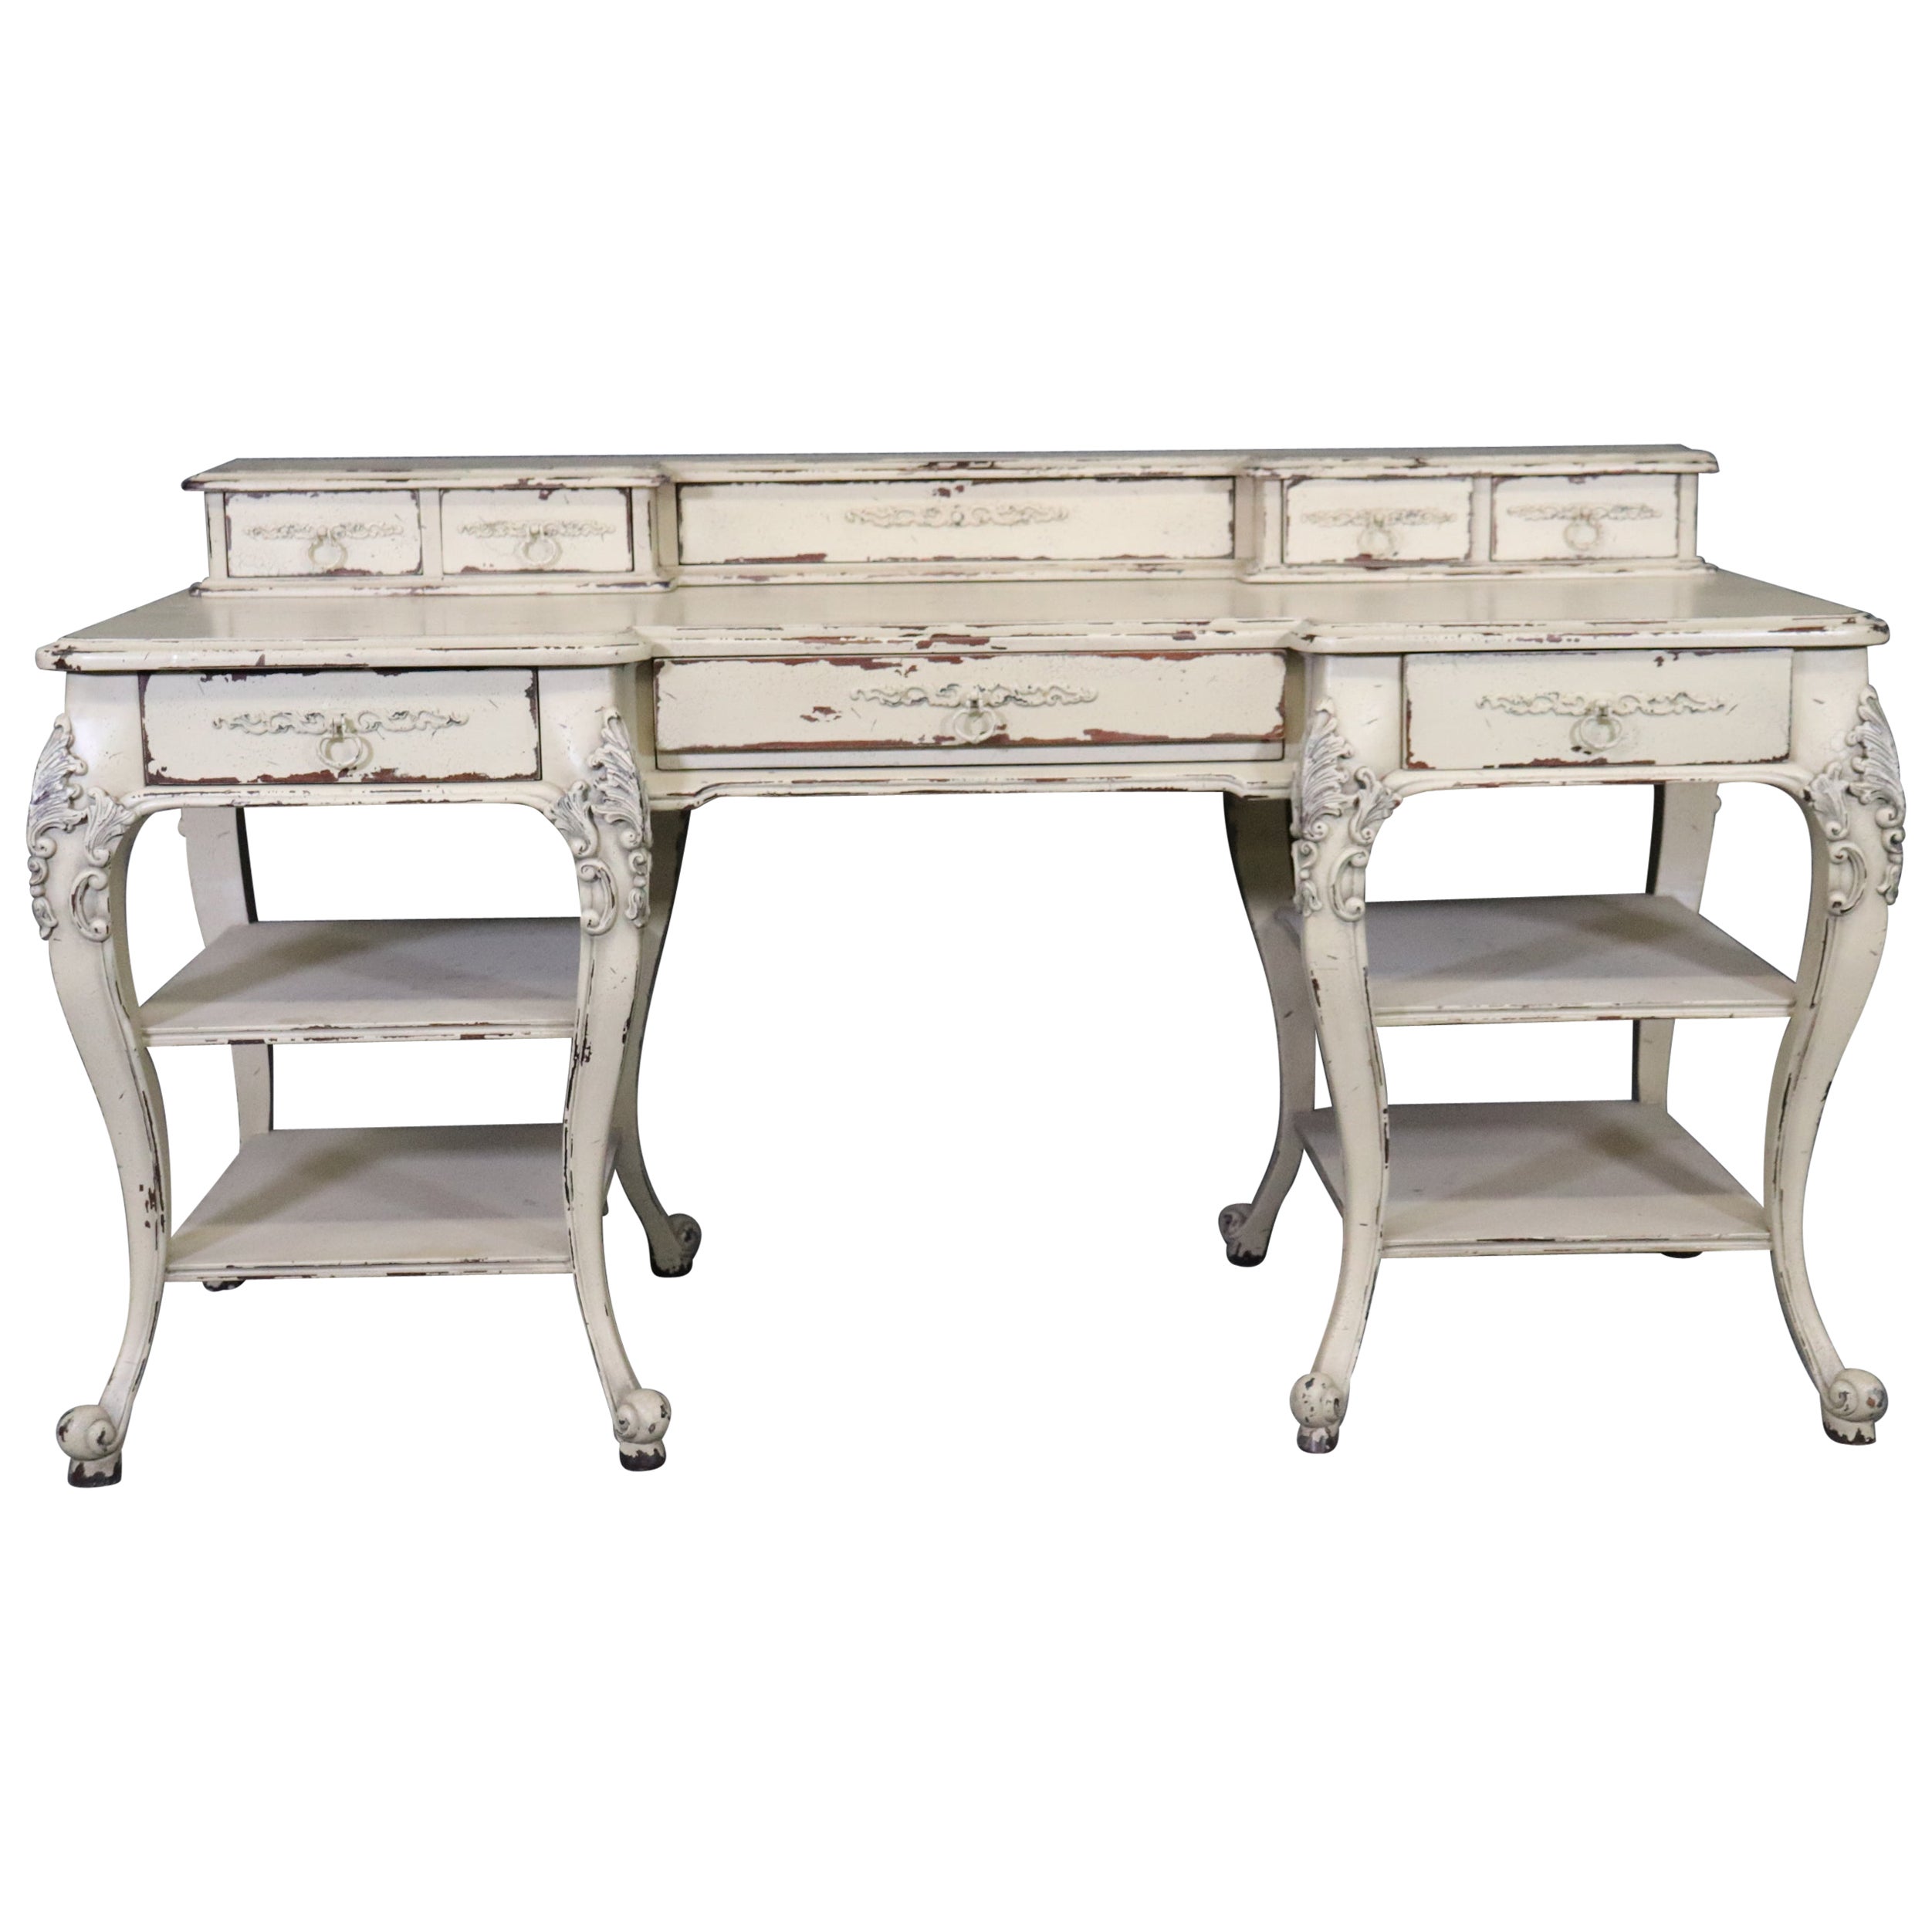 French Louis XV Style Distressed Painted Desk Writing Table